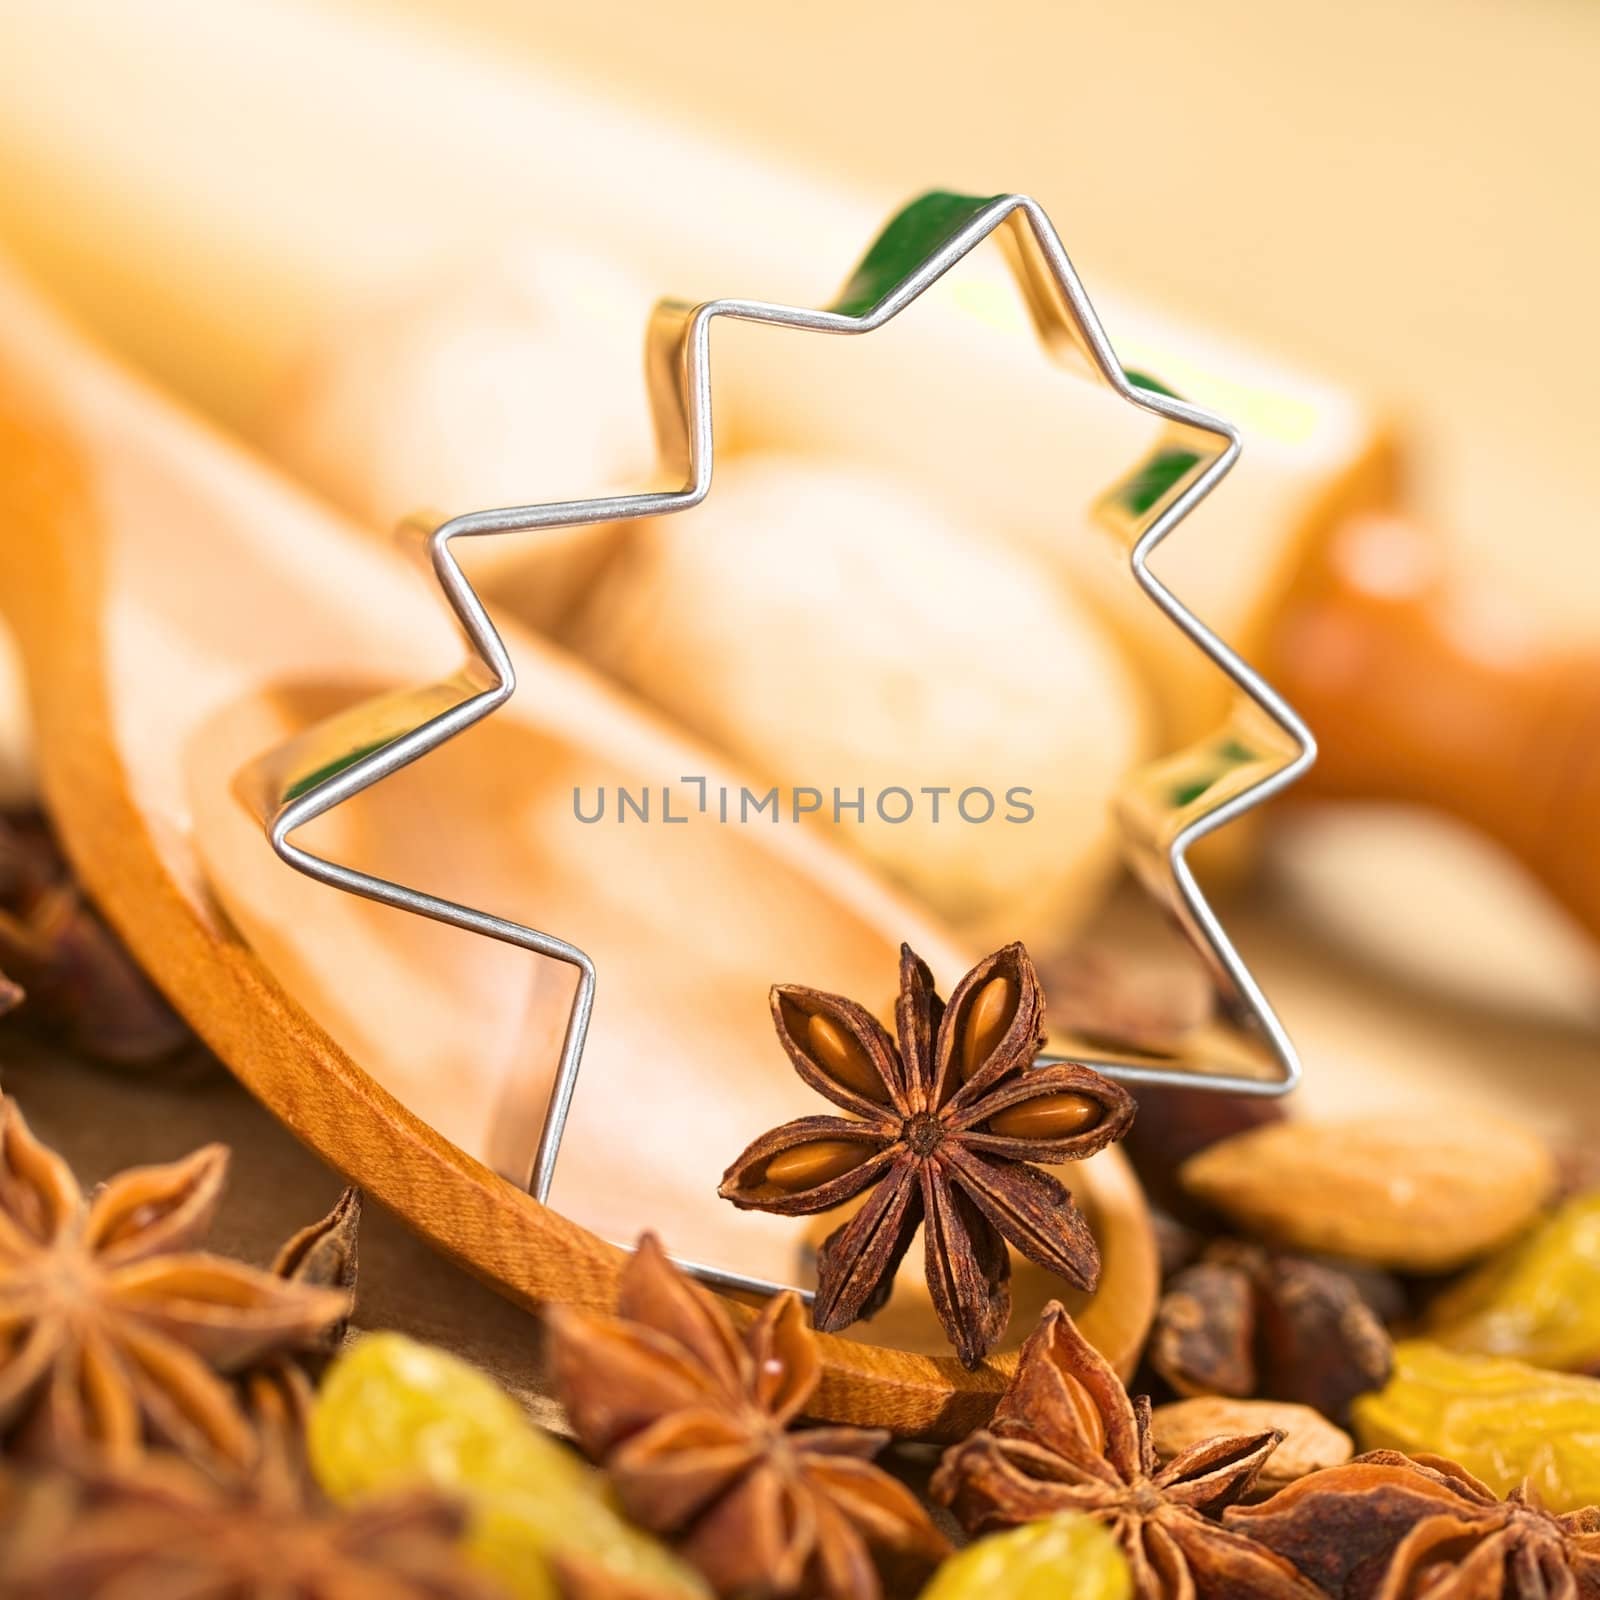 Christmas Baking. Tree shaped cookie cutter with star anise on wooden spoon surrounded by raisins and nuts, with a rolling pin in the back (Selective Focus, Focus on the left side of the cookie cutter and on the anise on the spoon)